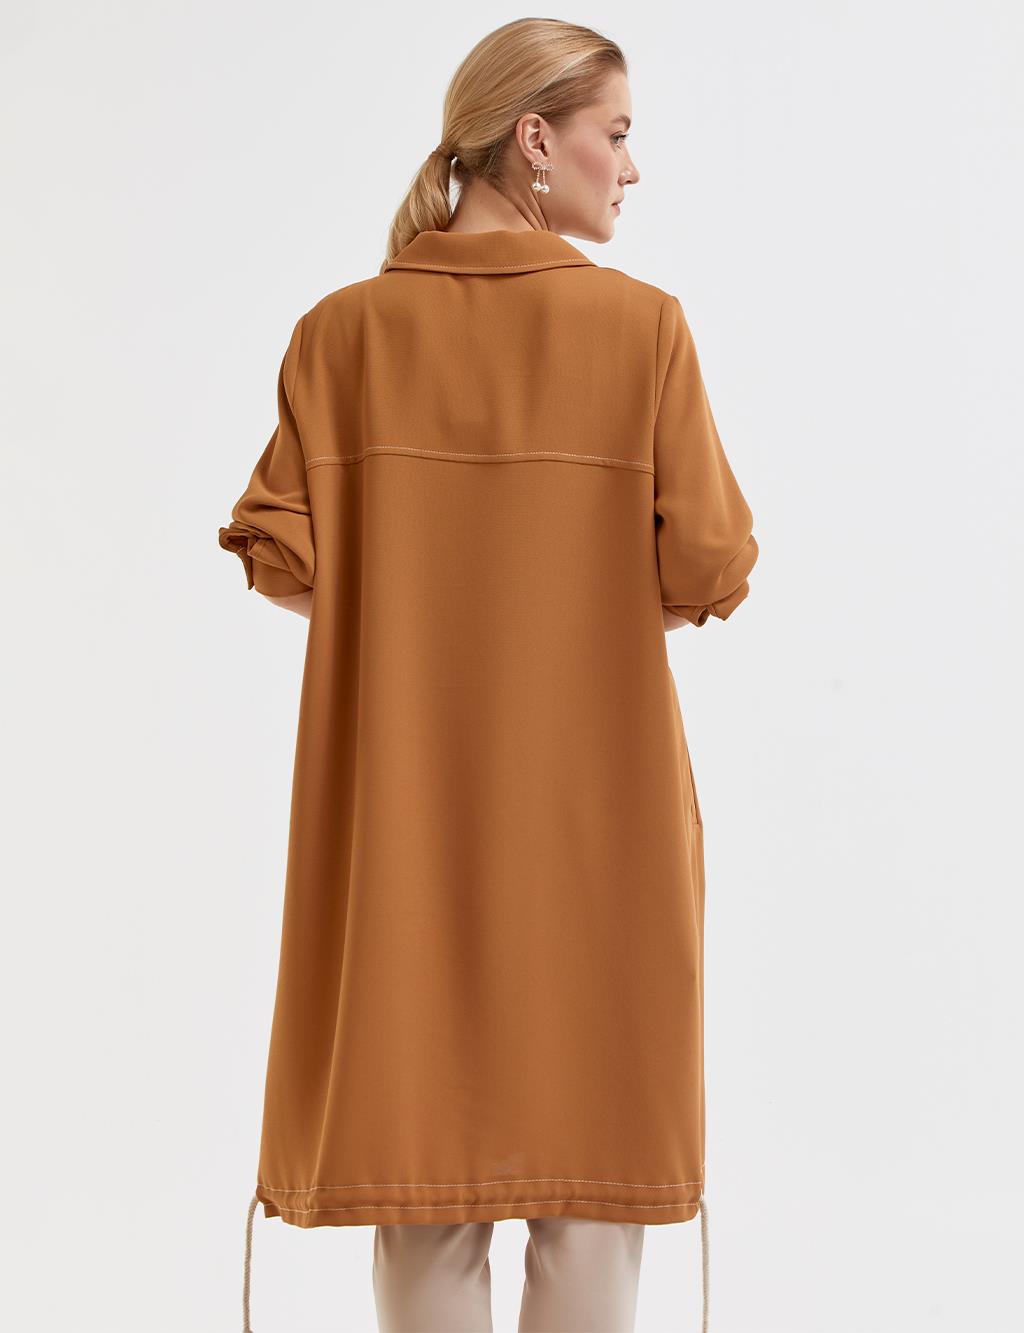 Contrast Stitched Wear & Go Camel